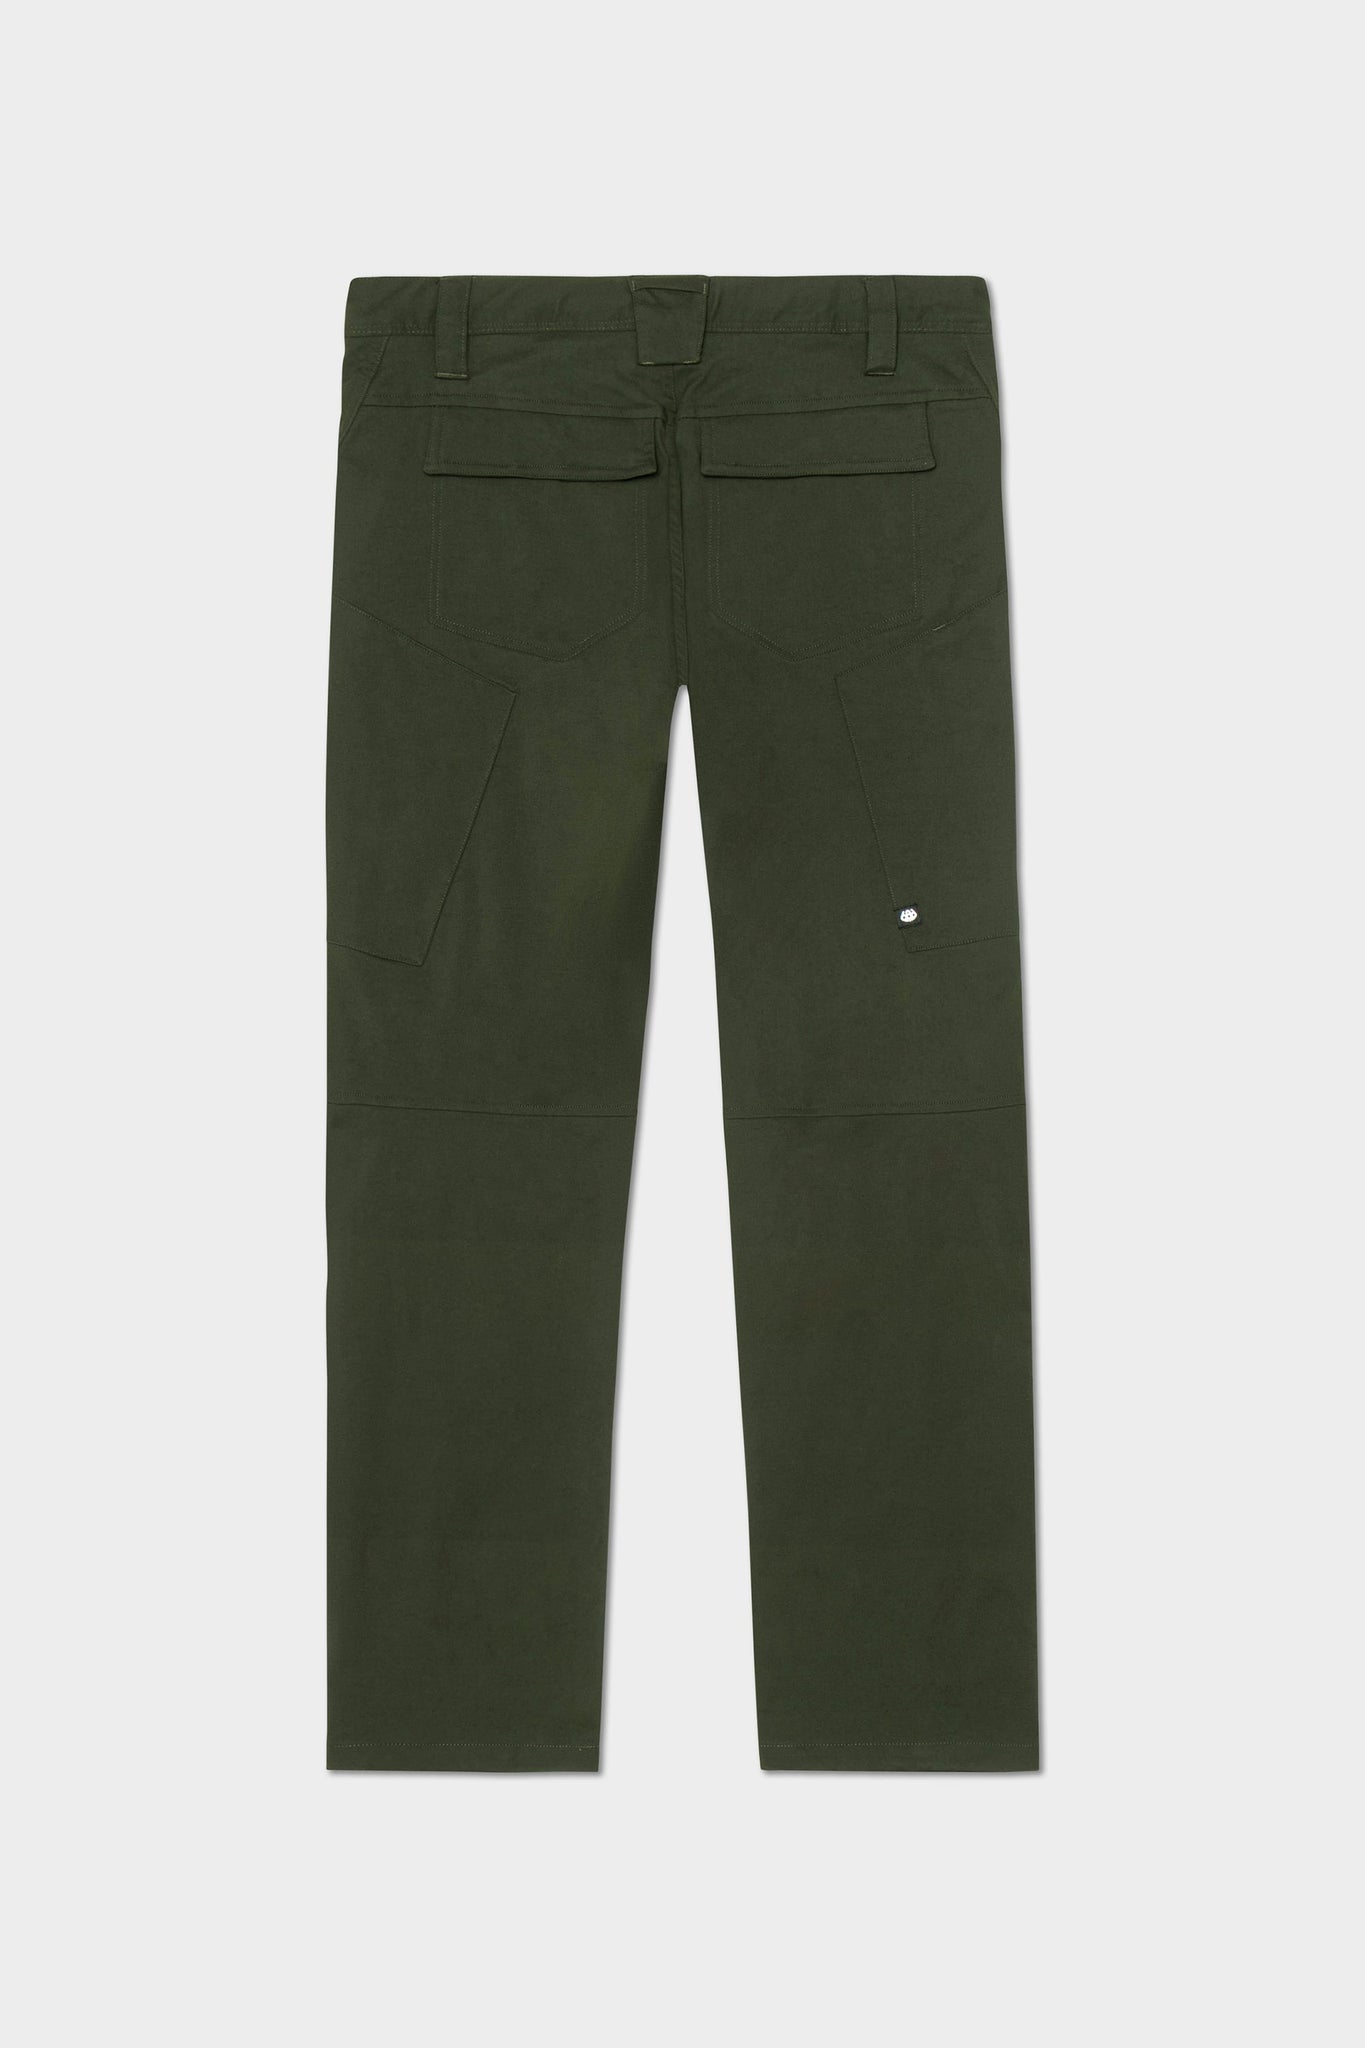 686 - Anything Cargo Pant Relaxed Fit Dark Green